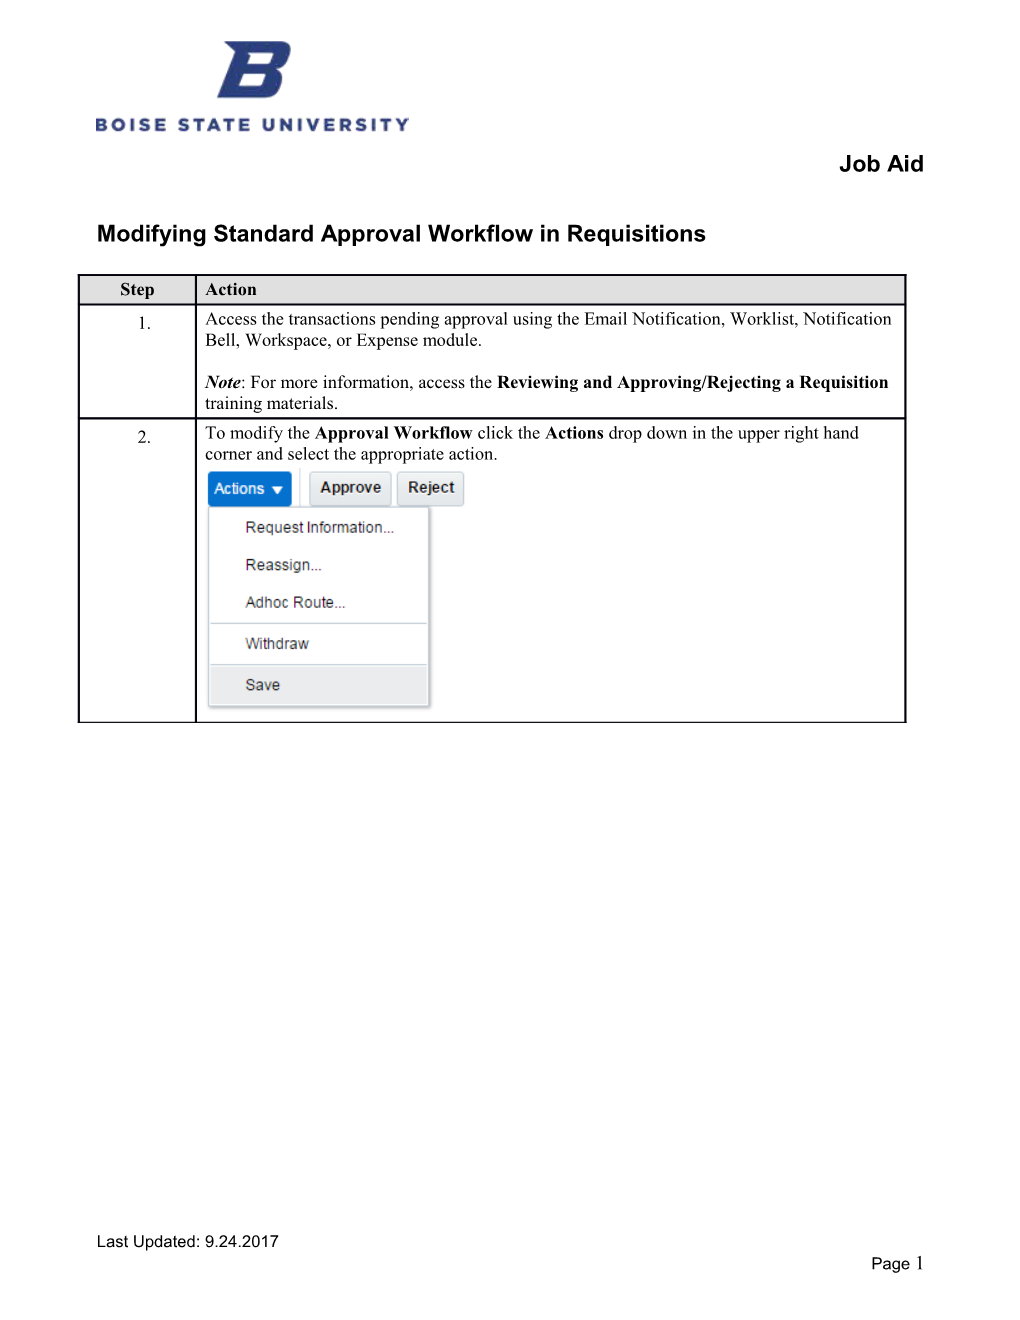 Modifying Standard Approval Workflow in Requisitions